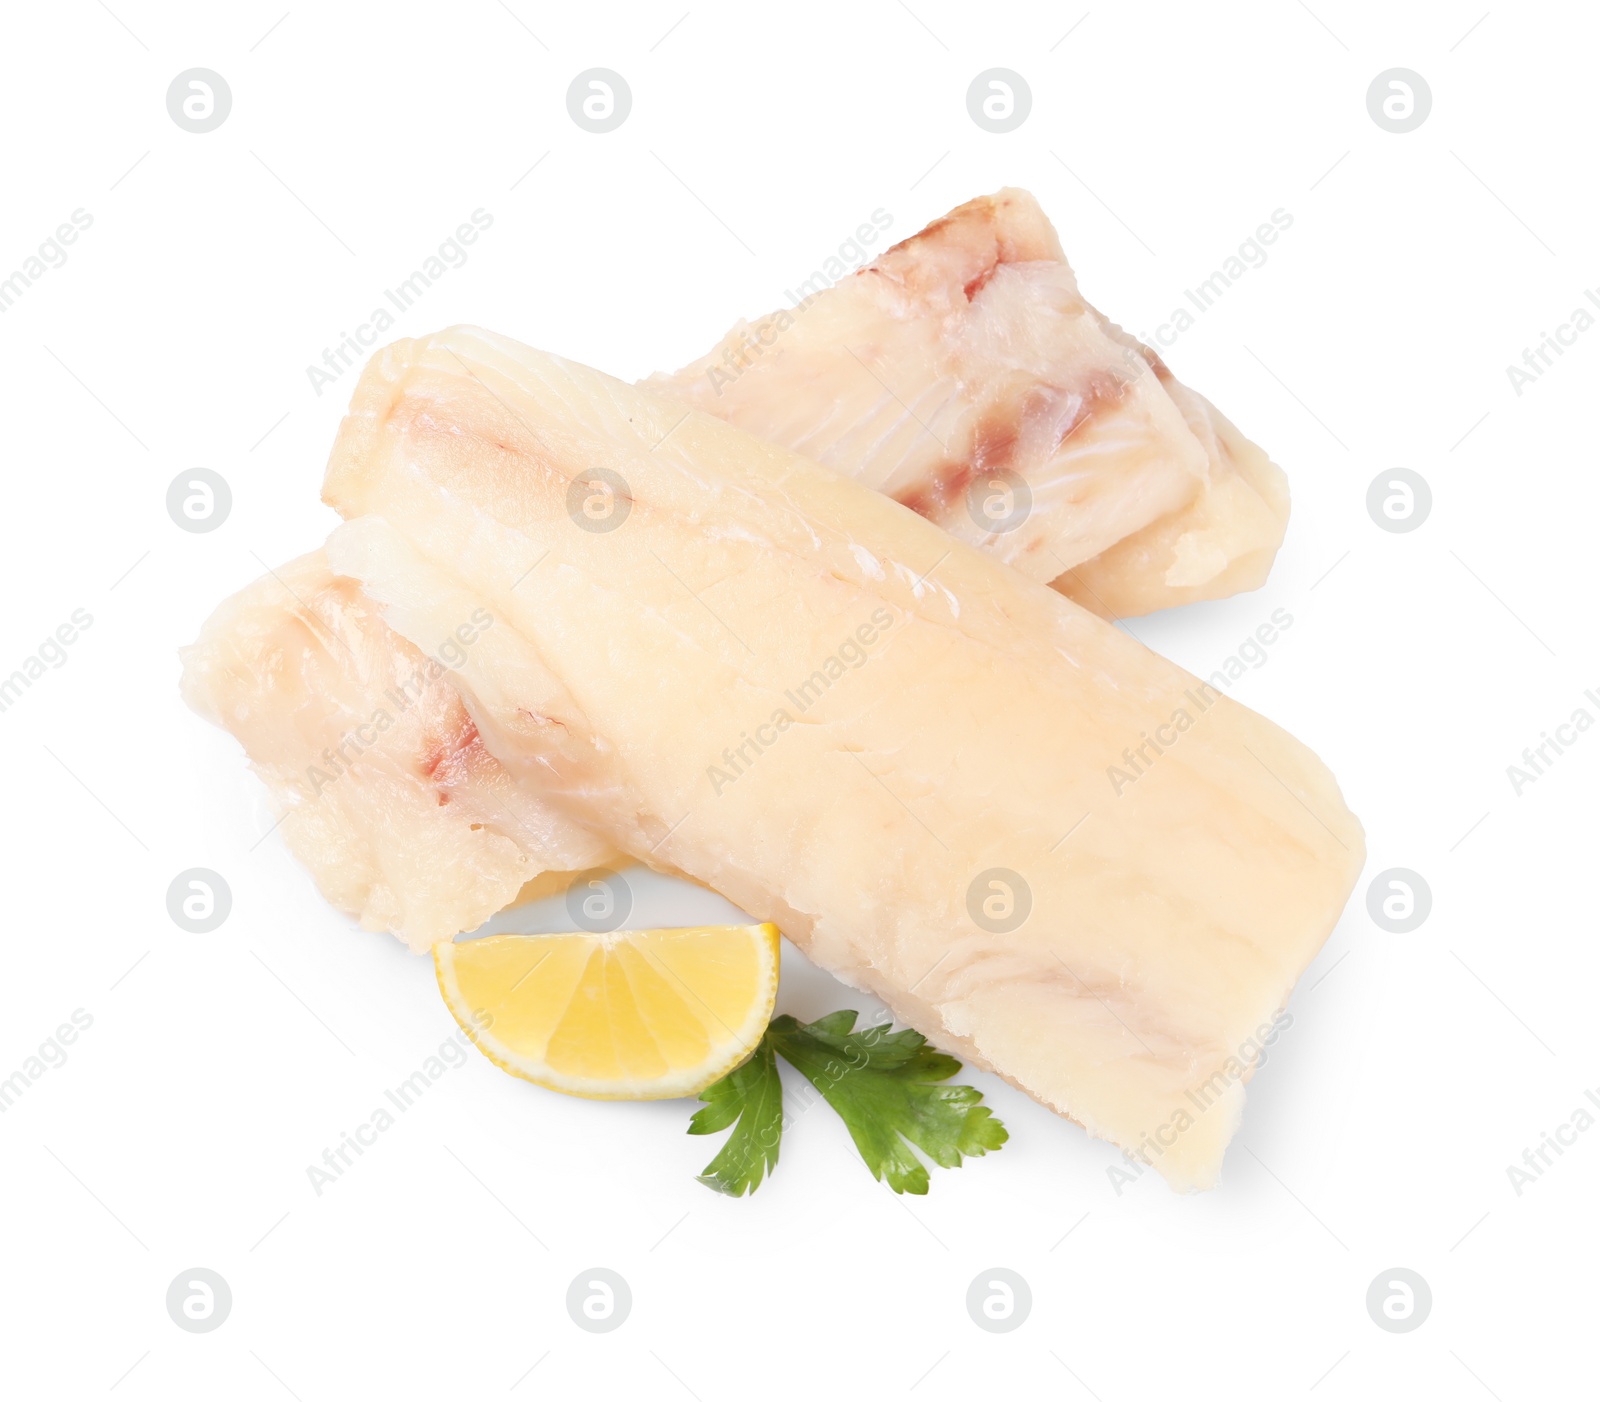 Photo of Pieces of raw cod fish, parsley and lemon isolated on white